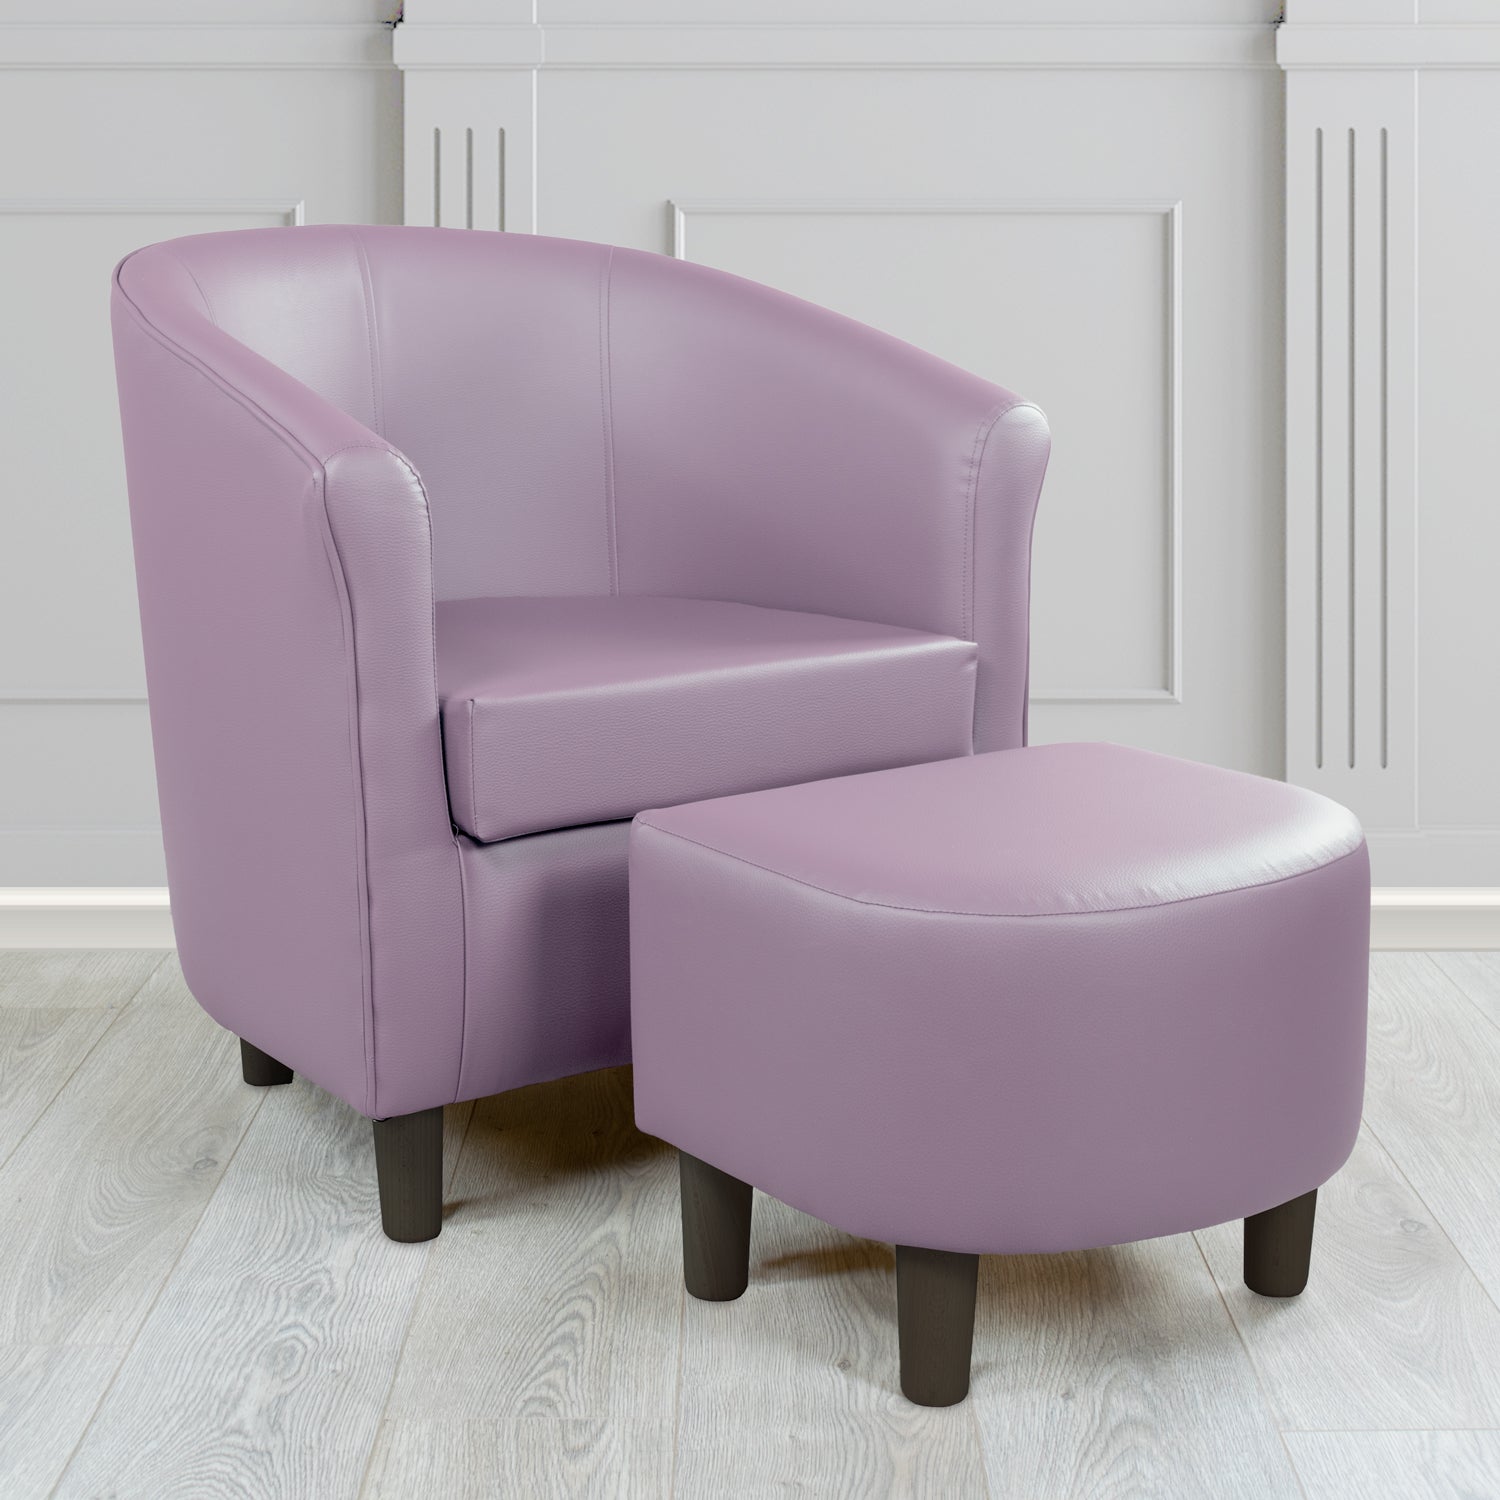 Tuscany Just Colour Purple Rain Faux Leather Tub Chair with Footstool Set - The Tub Chair Shop